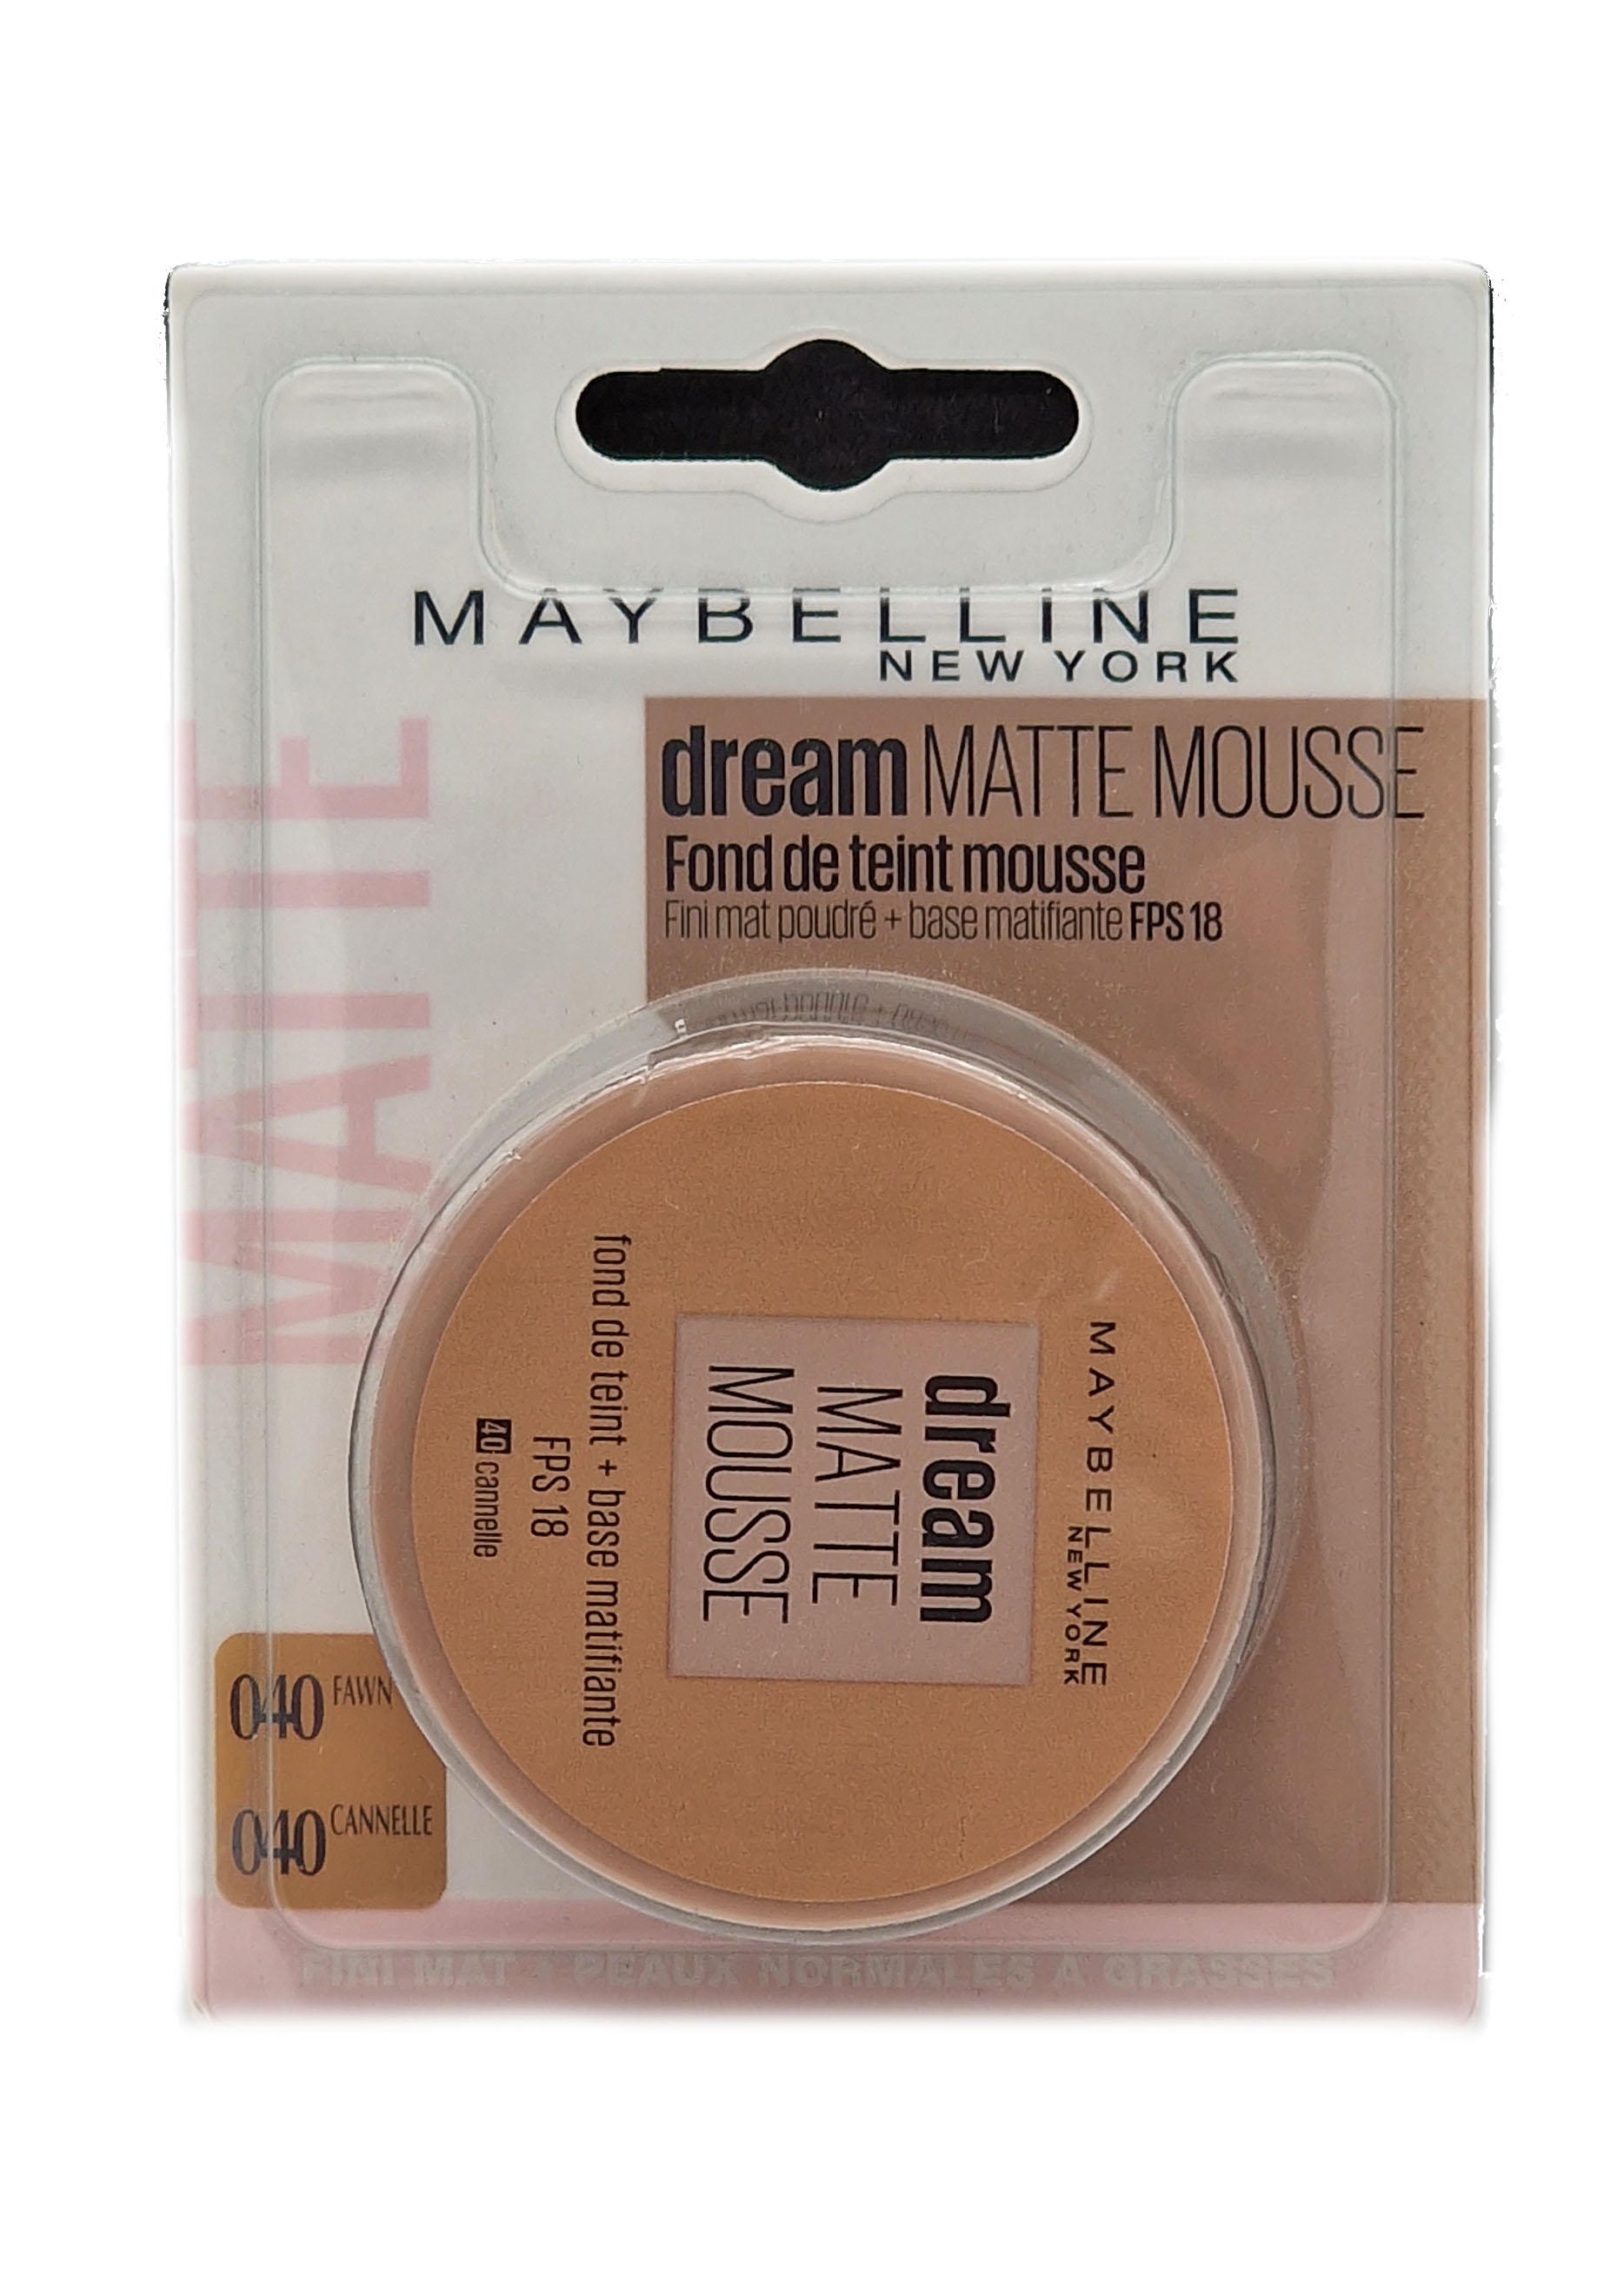 Maybelline Make-Up Foundation 18ml Dream Matte Mousse SPF 18 #40 Cannelle